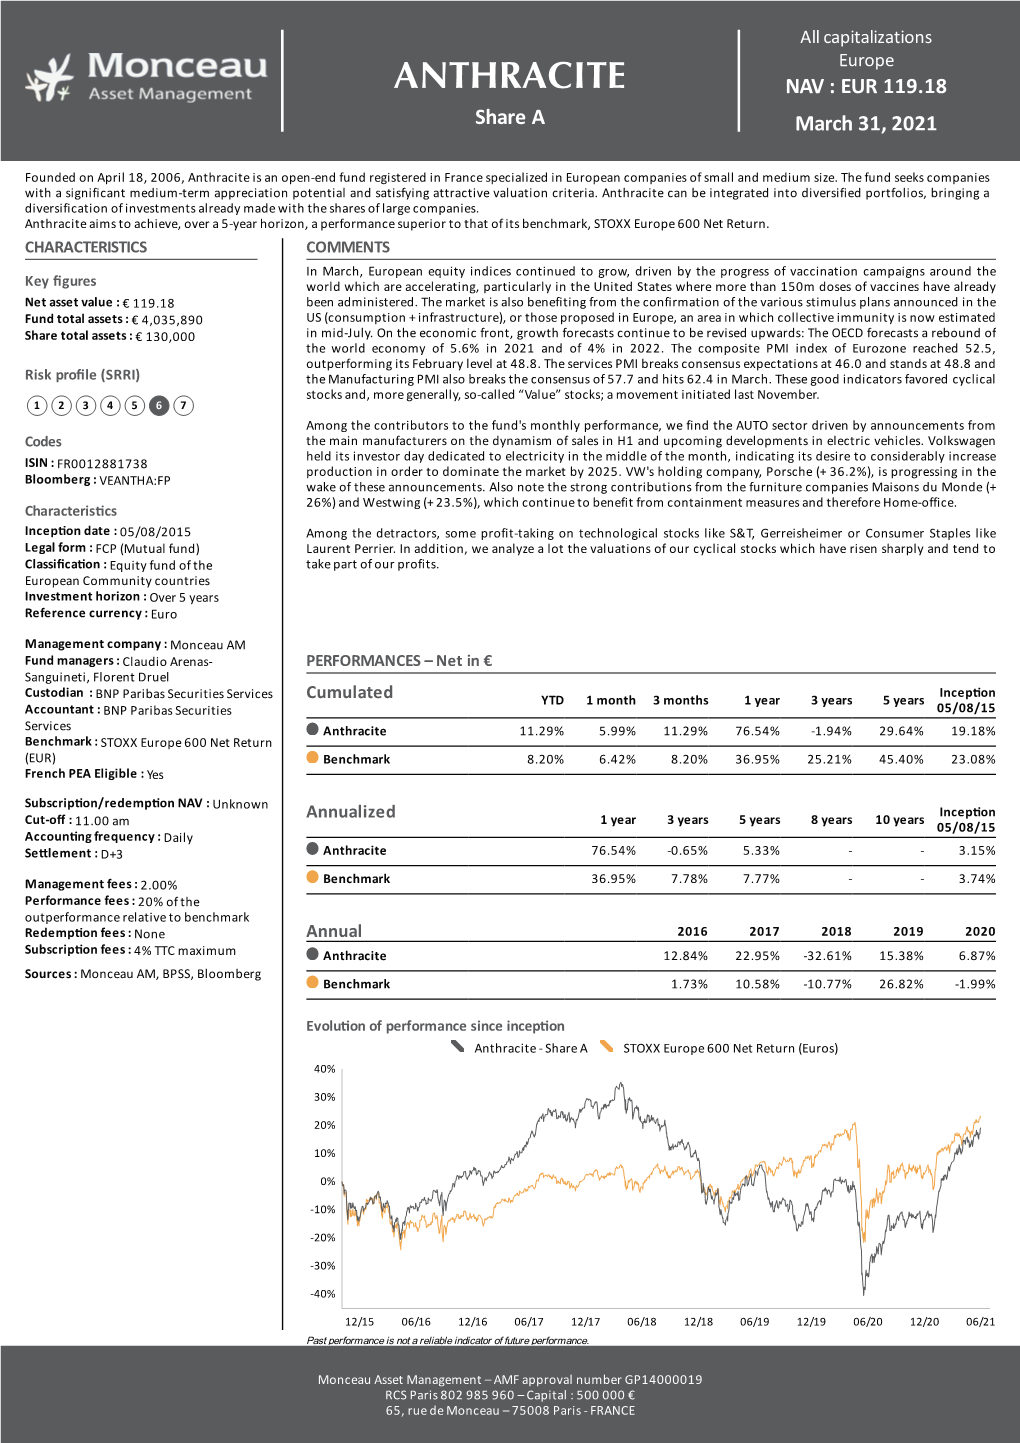 ANTHRACITE NAV : EUR 119.18 Share a March 31, 2021